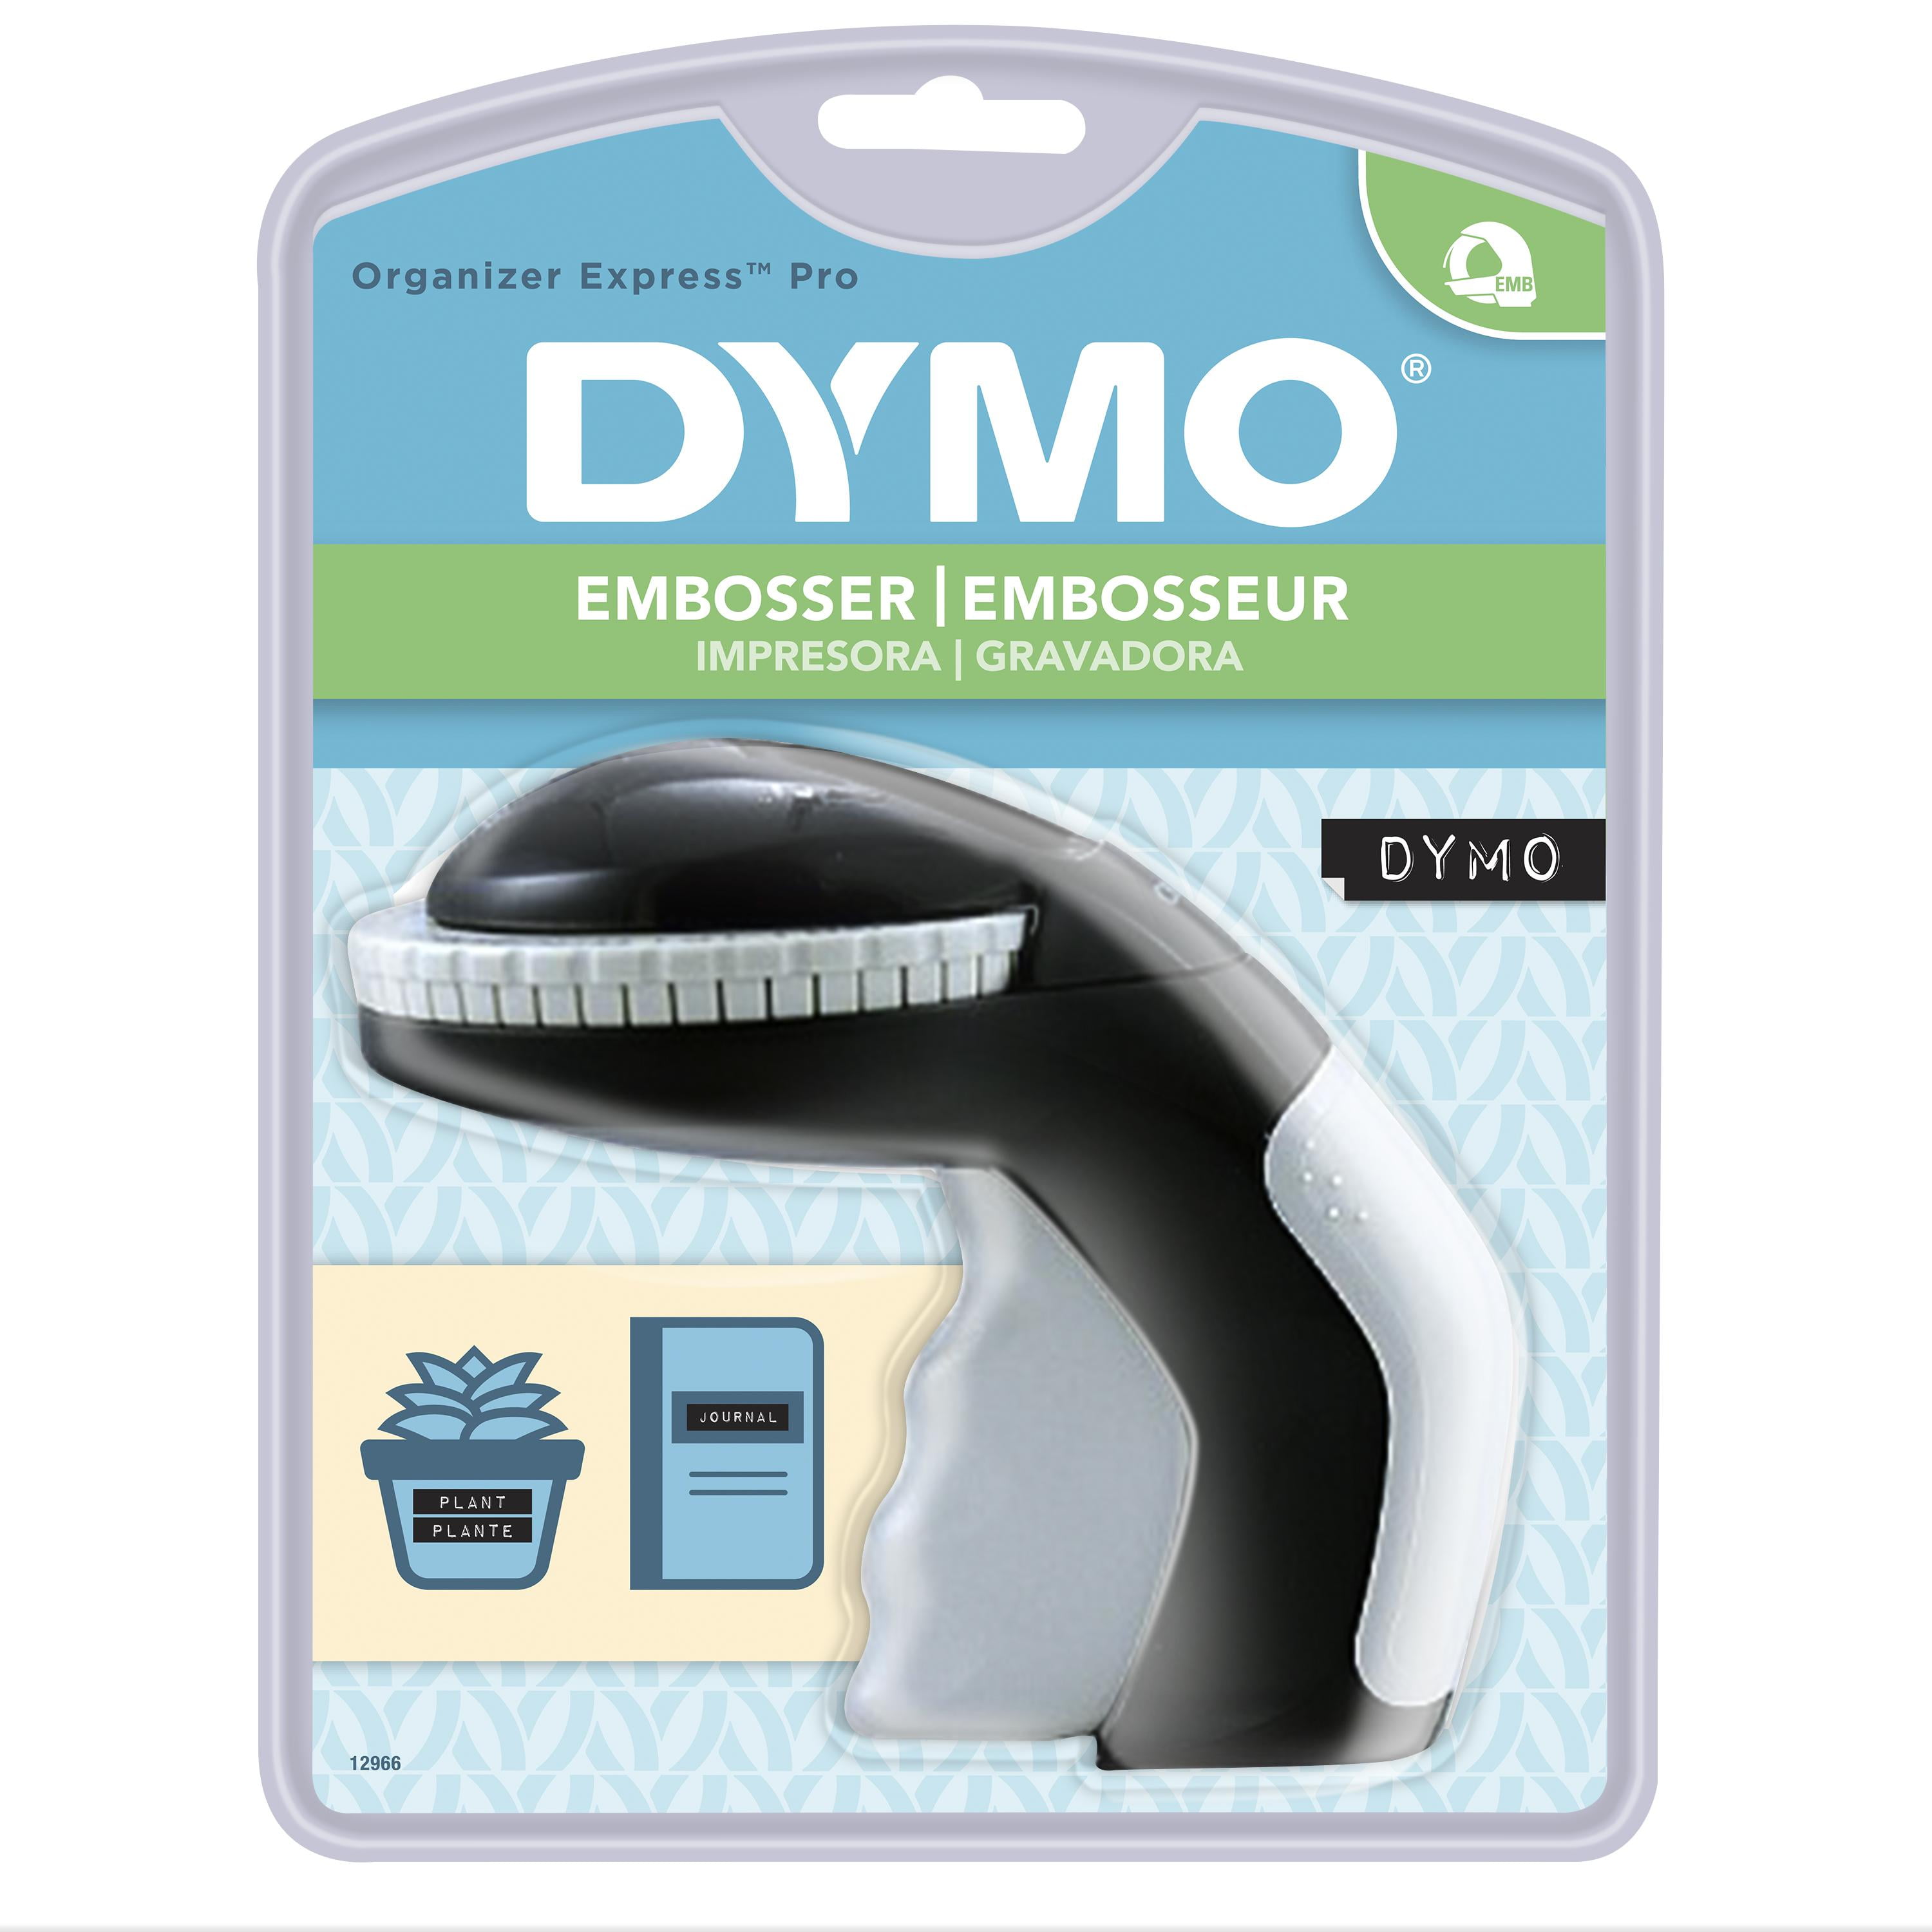 DYMO Embossing Label Maker with 3 DYMO Label Tapes 